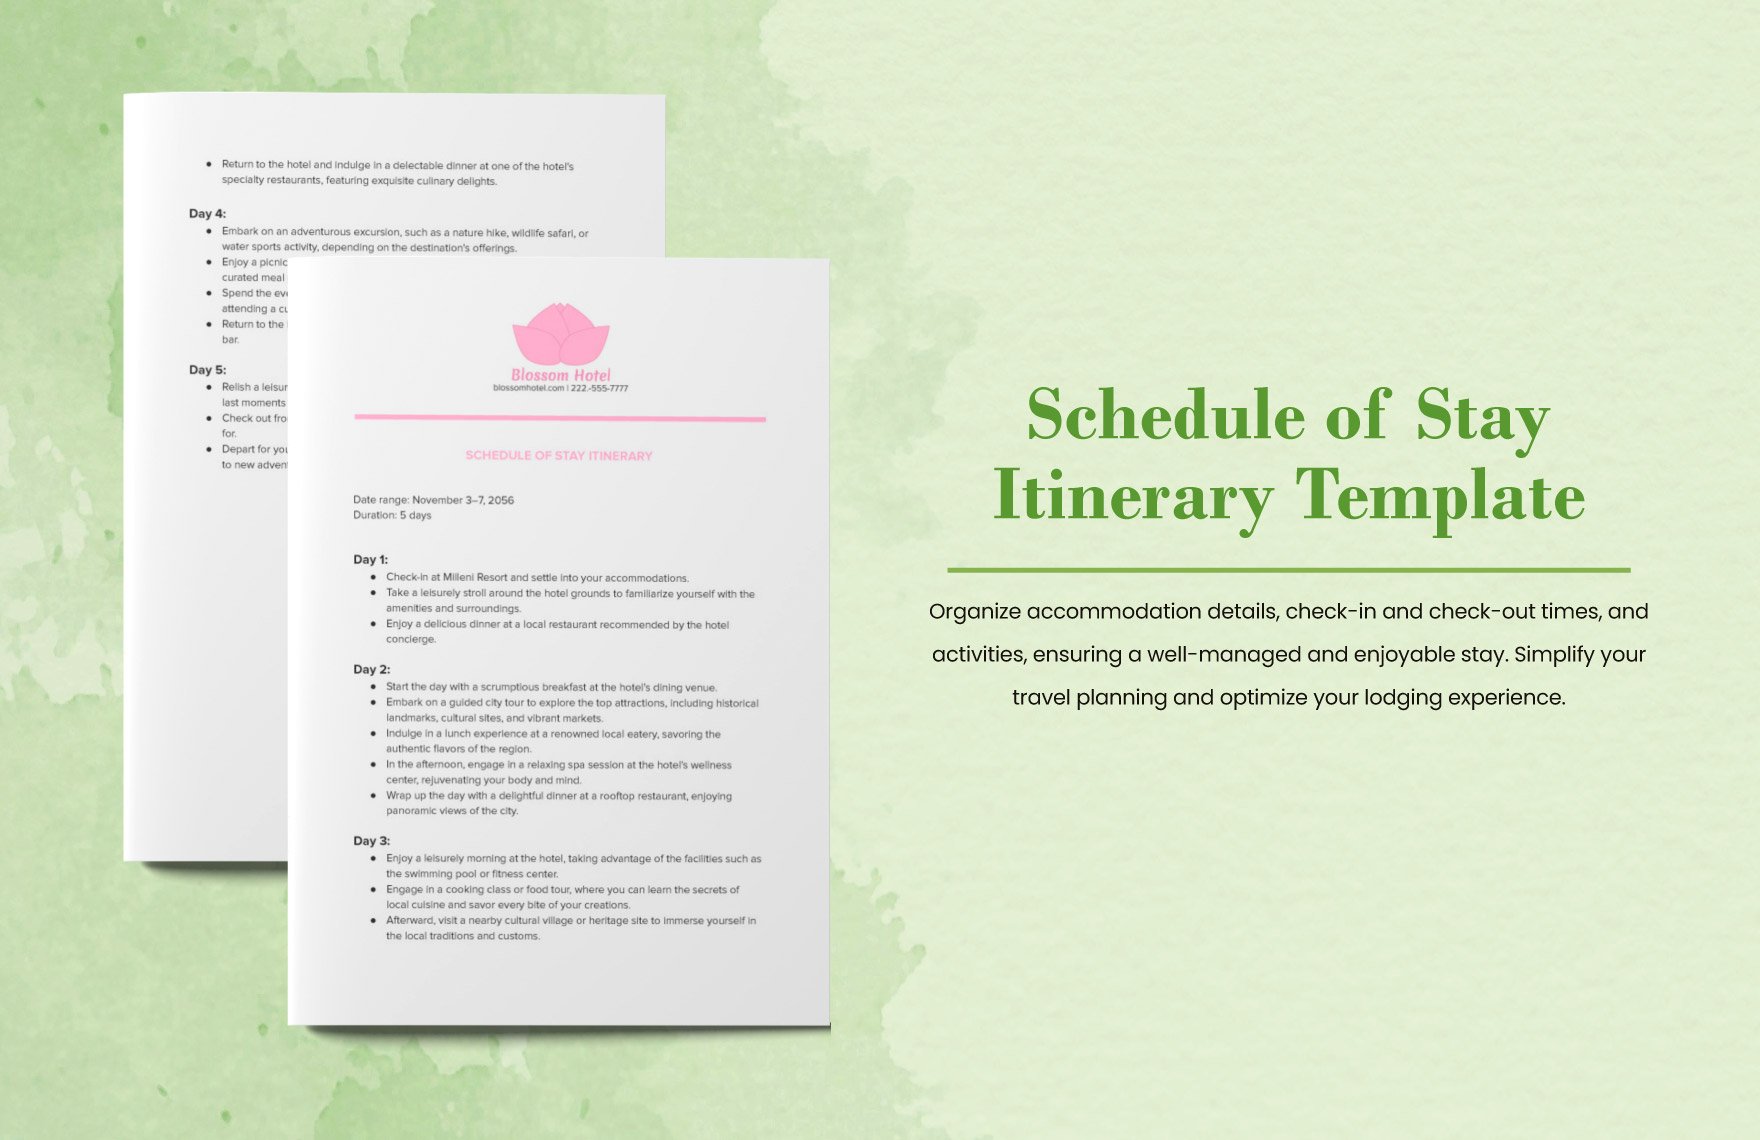 Schedule of Stay Itinerary Template